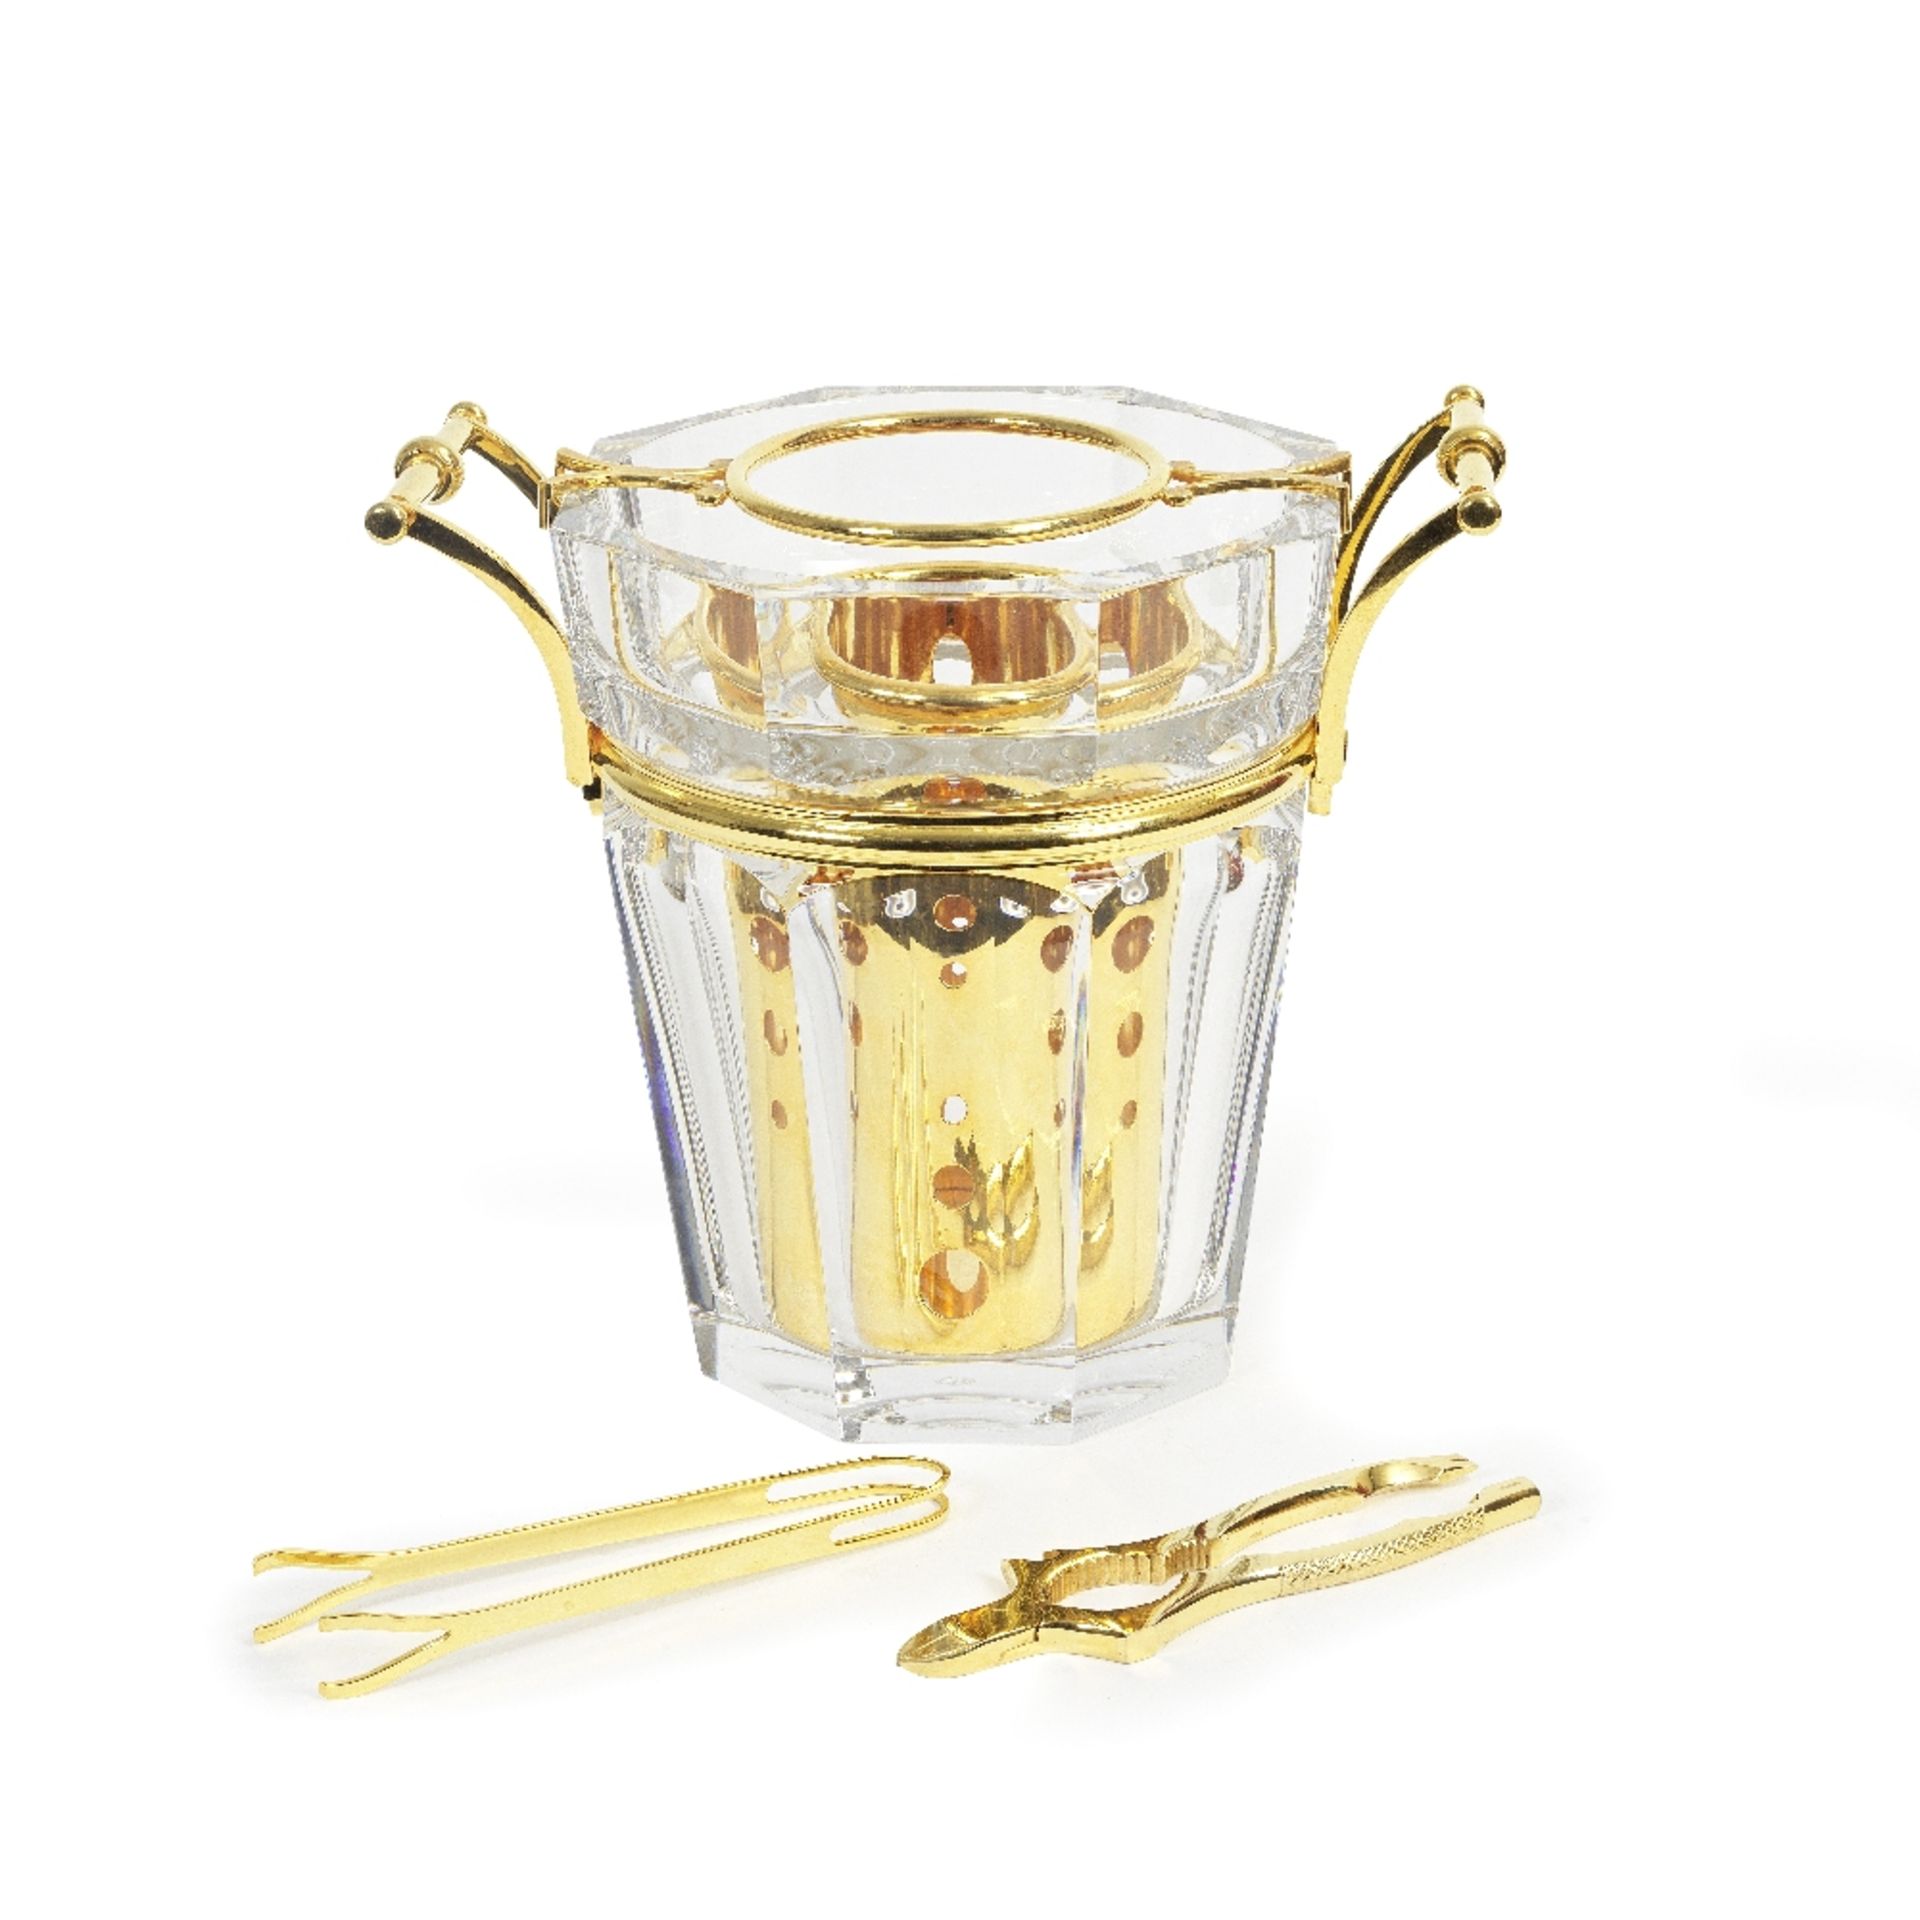 A Baccarat cut glass and gold plated mounted champagne bucket